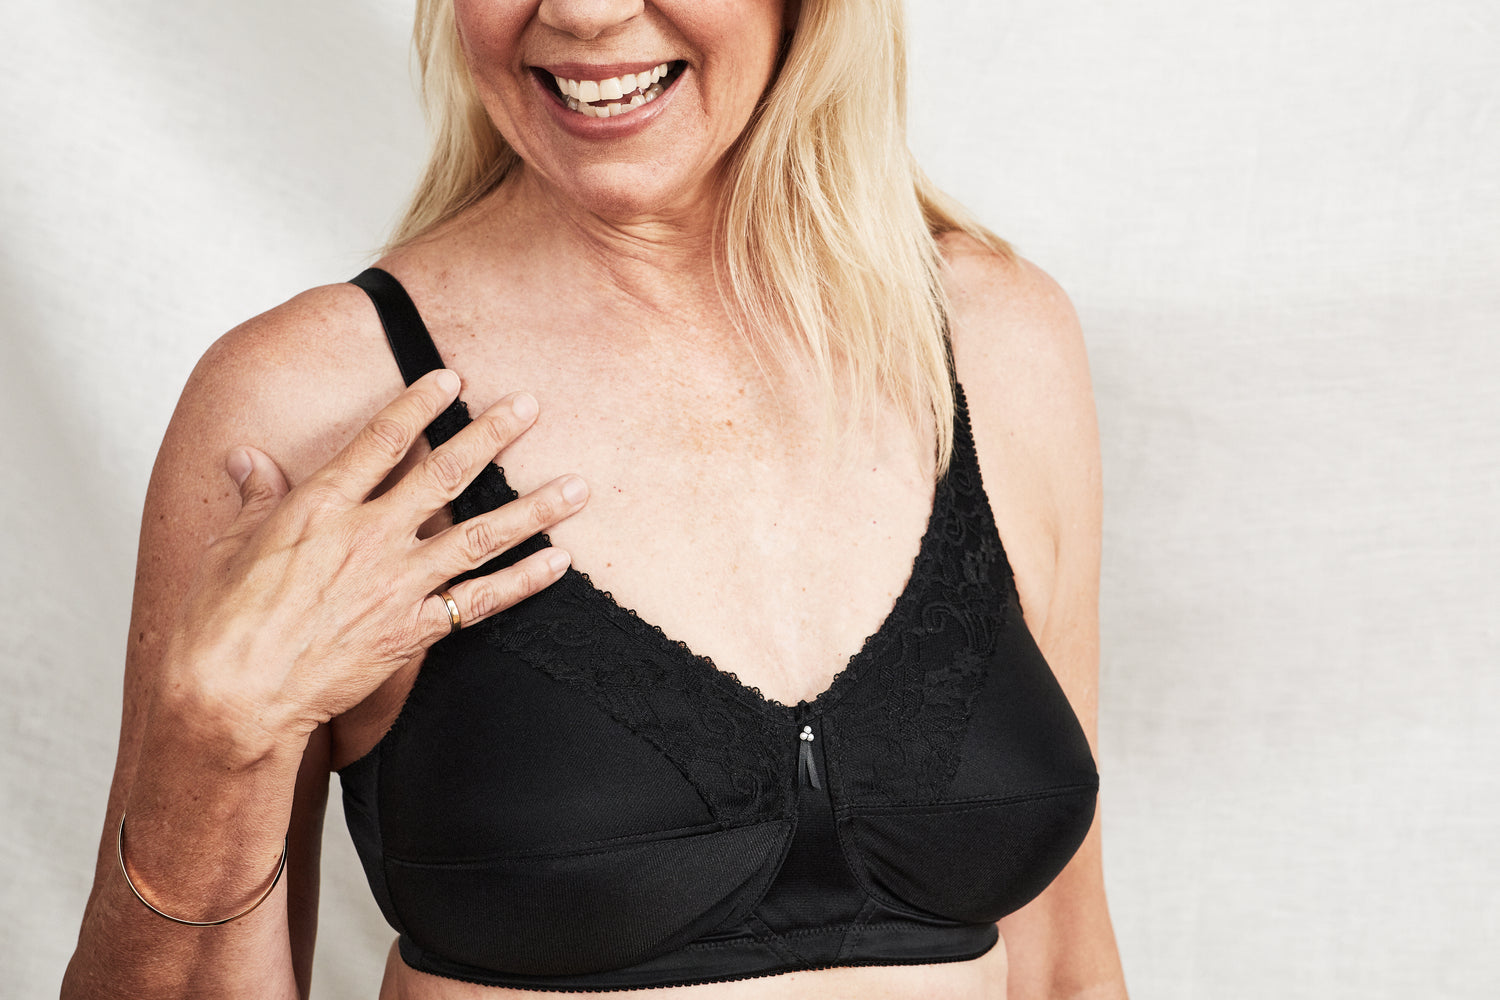 Adapt a Bra to Accommodate a Prosthesis - Threads